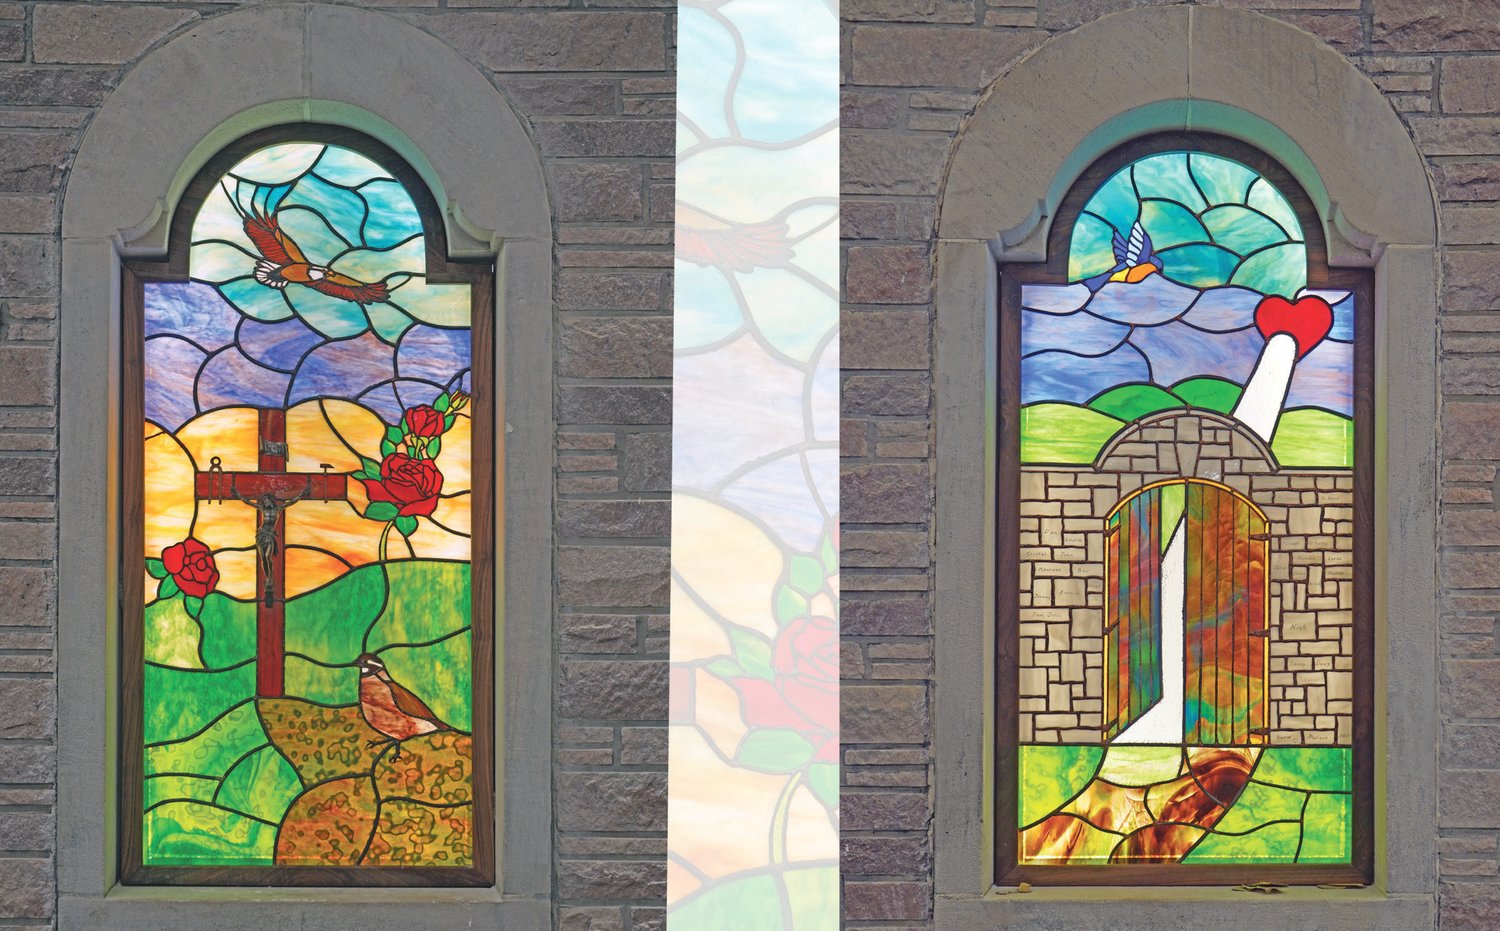 These two new art-glass windows were created by Jim Wisch for the chapel of the nearly completed Catholic Charities of Central and Northern Missouri (CCCNMO) headquarters in Jefferson City. The first represents the building’s past use as a high school seminary chapel and gym, as well as CCCNMO’s first 10 years of existence. The second points to the building’s future of paving and illuminating the path to God through the gateway of concrete acts of charity and mercy.